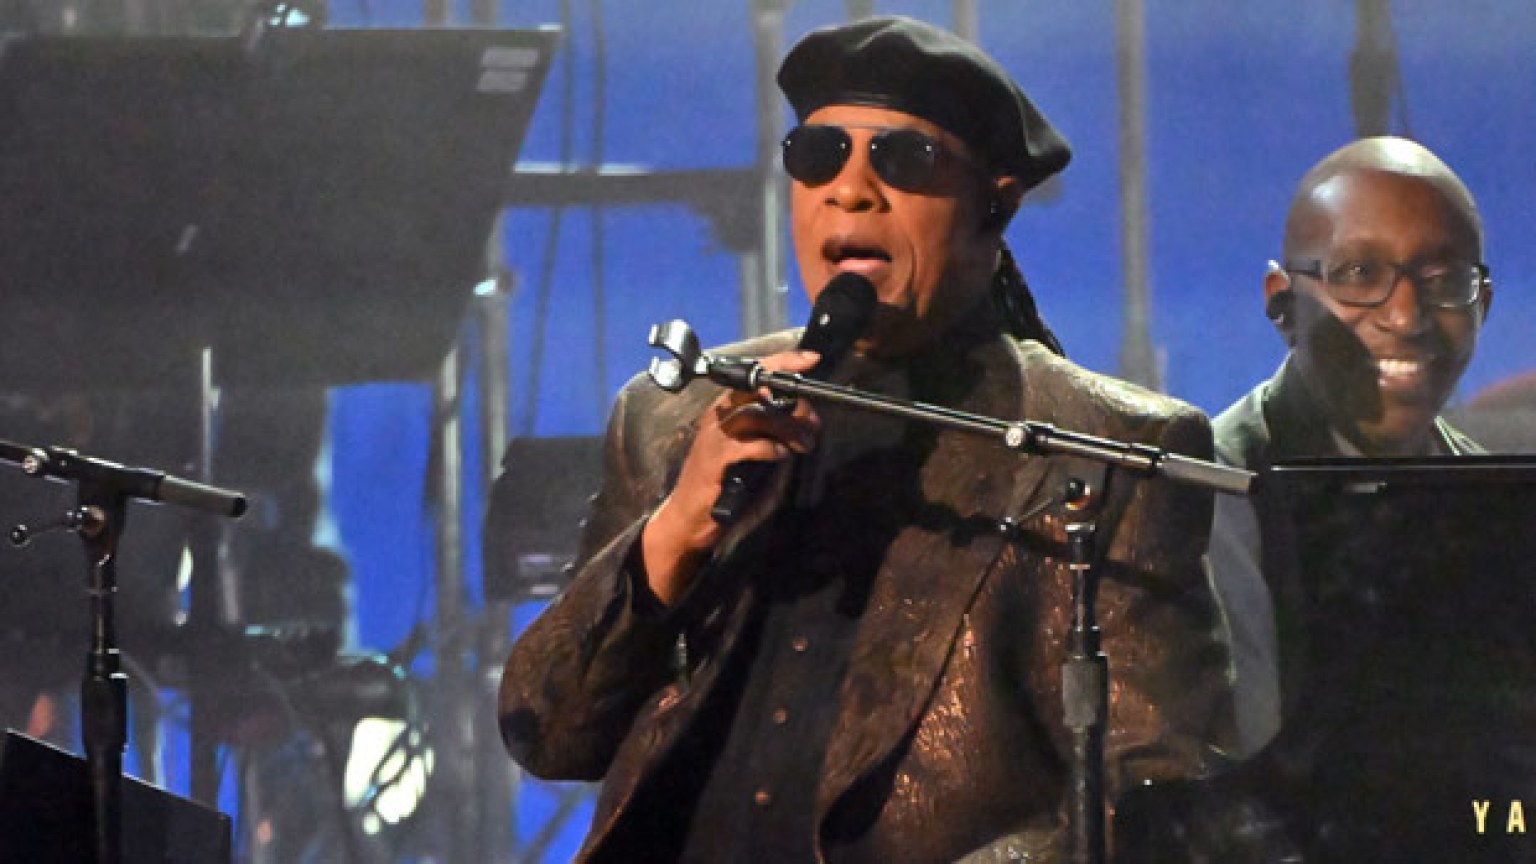 Stevie Wonder Performs With Smokey Robinson & More At The 2023 Grammys